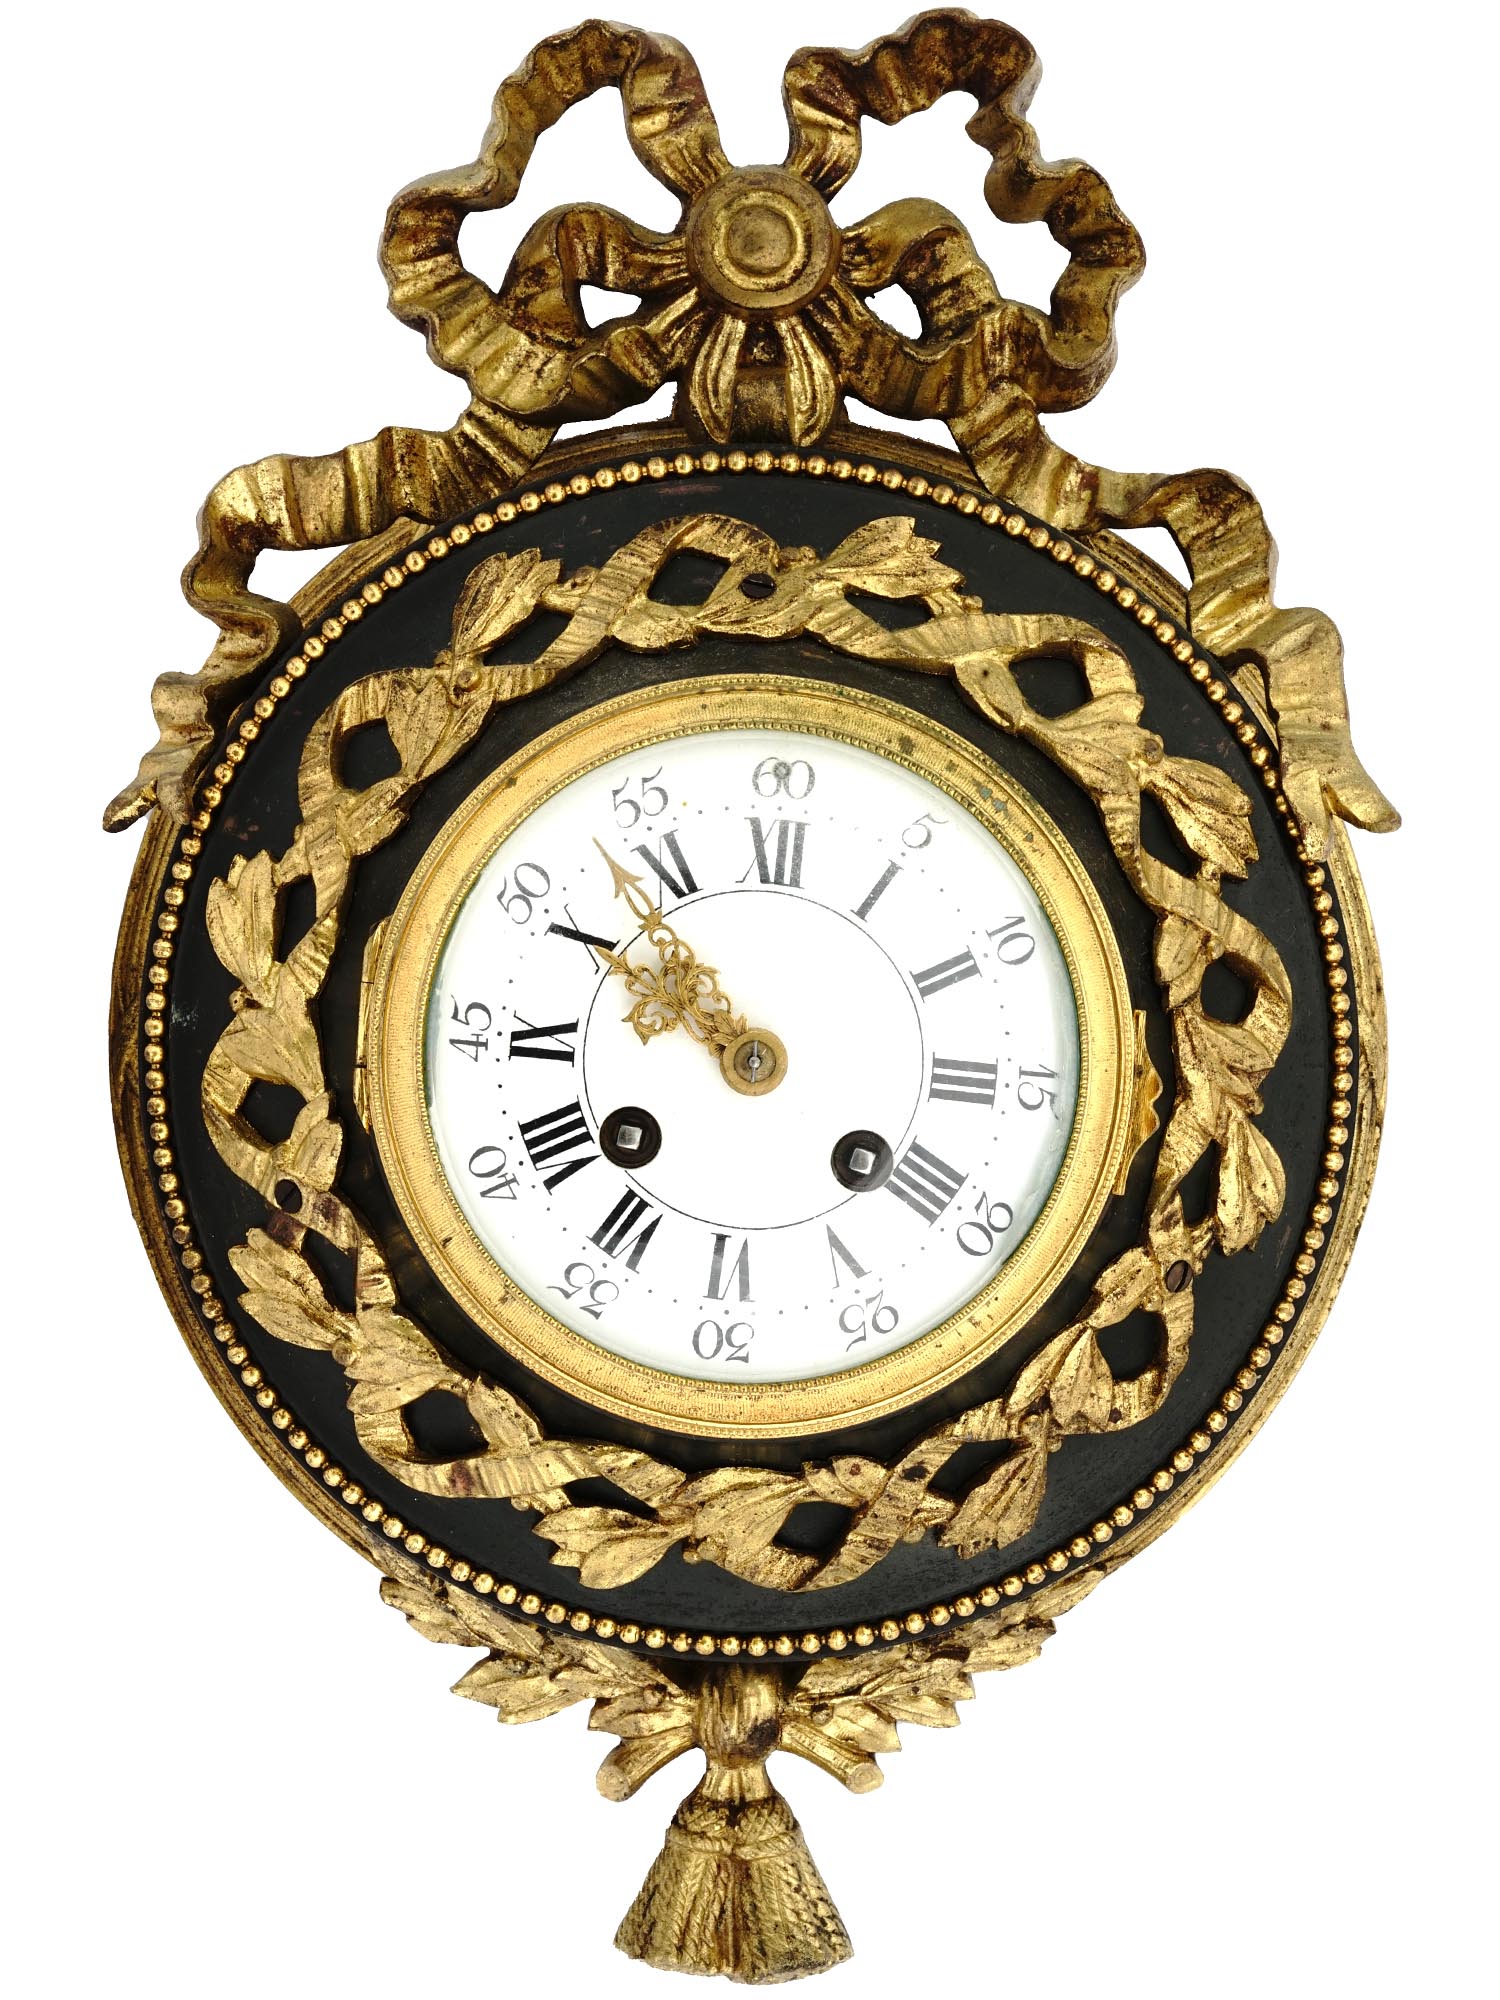 LATE 19TH CENTURY FRENCH GILT BRONZE WALL CLOCK PIC-0